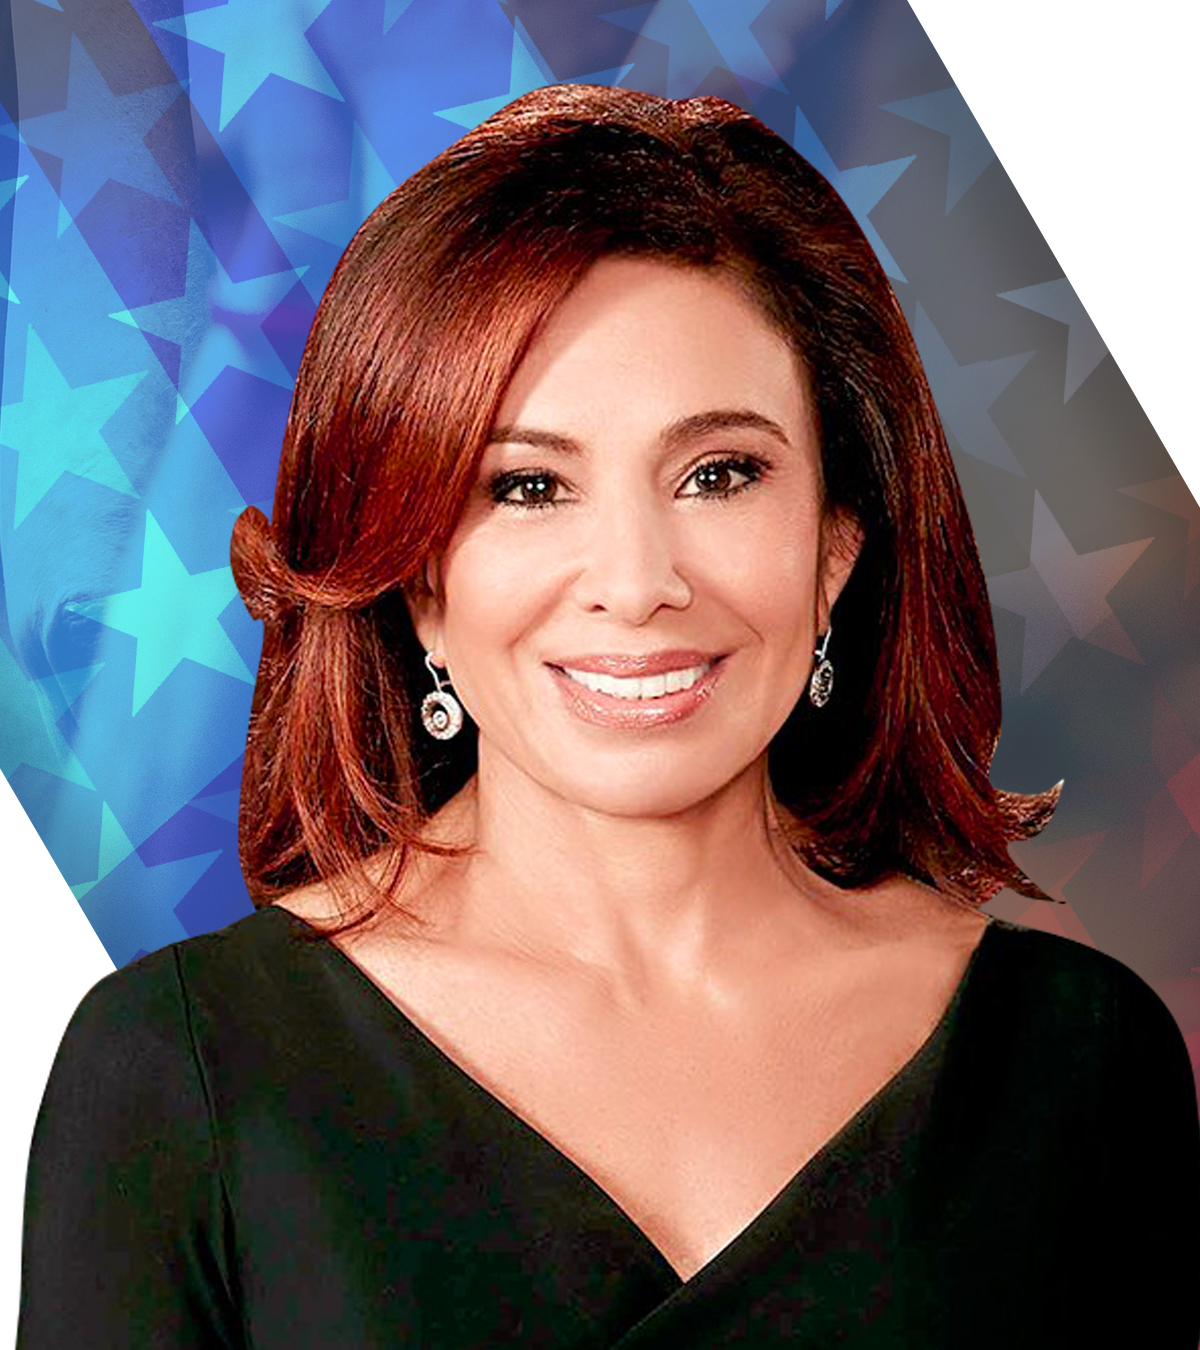 Host of “Justice with Judge Jeanine”